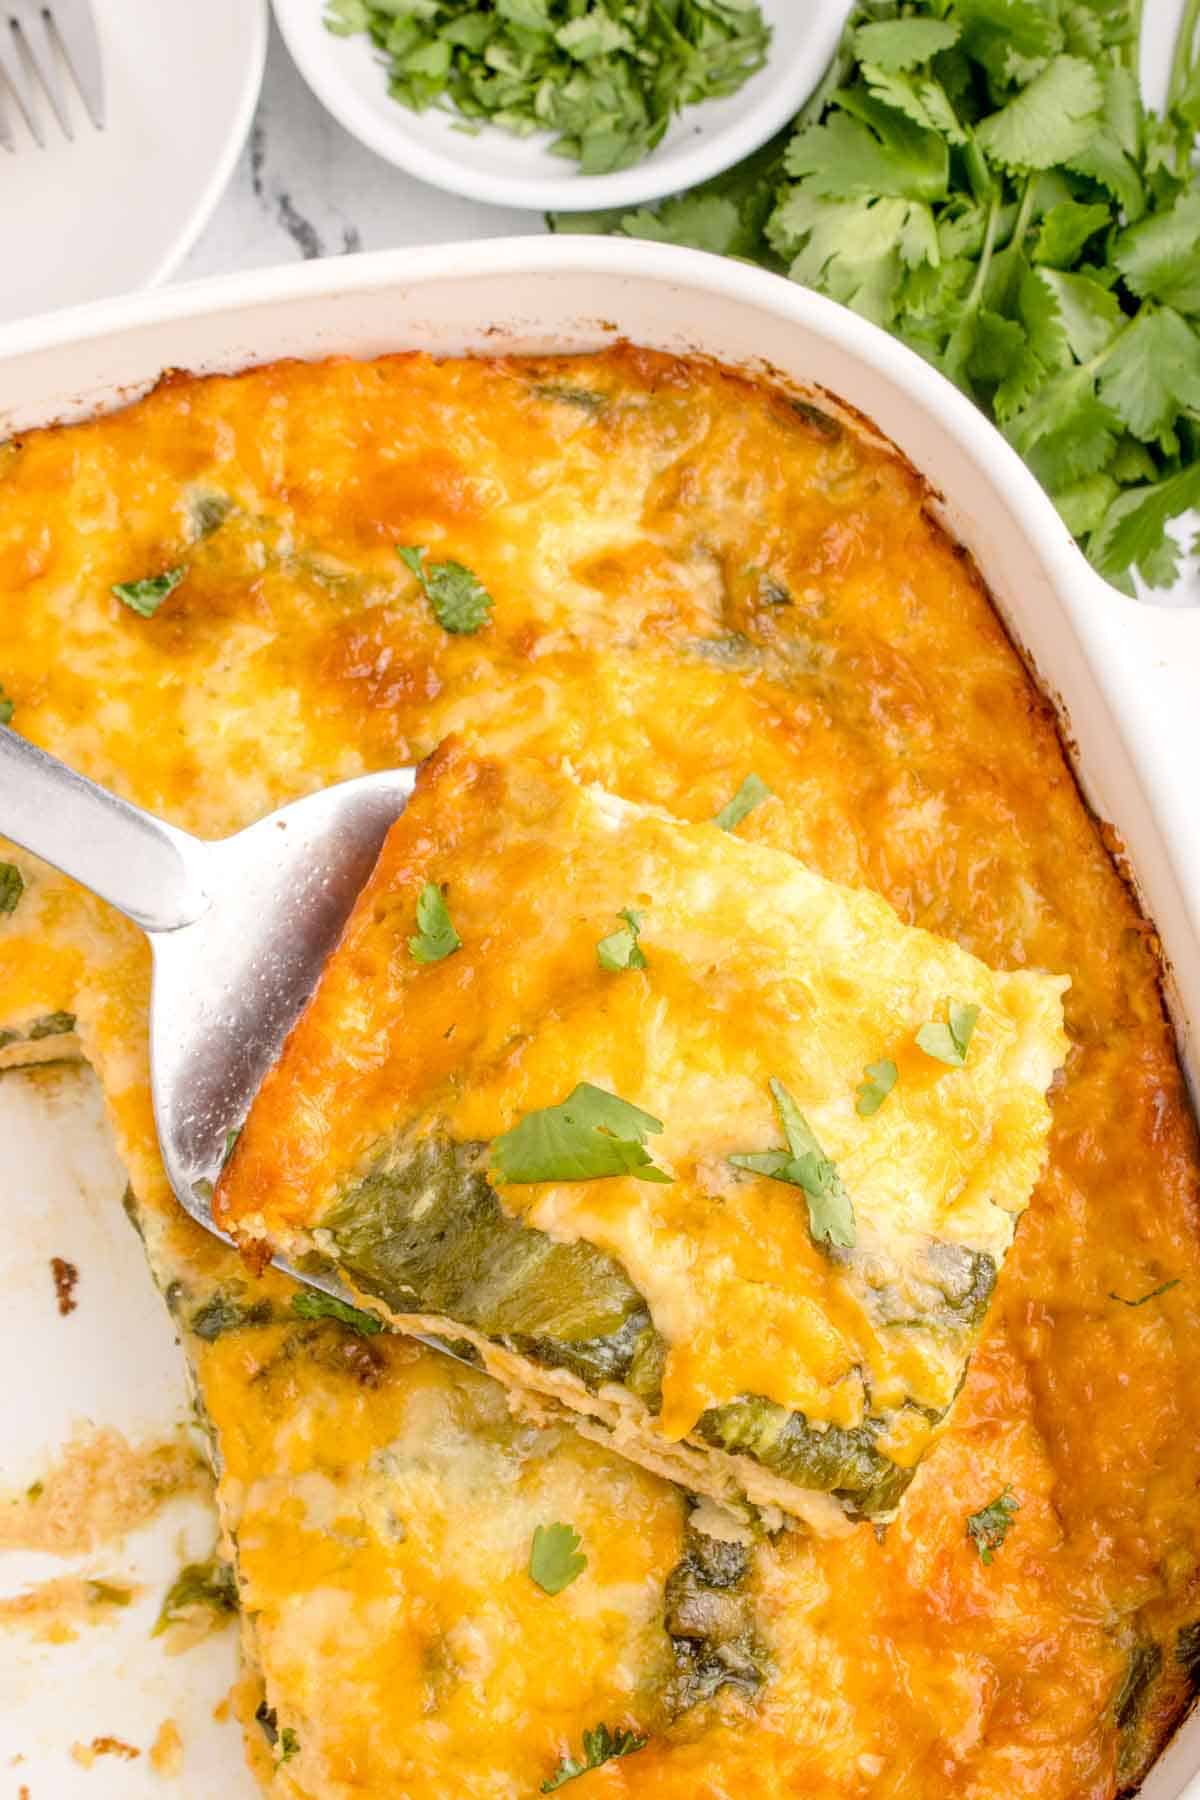 Chile Relleno Casserole is a delicious and comforting Mexican-inspired dish that captures the flavors of traditional chiles rellenos in an easy-to-make casserole form.